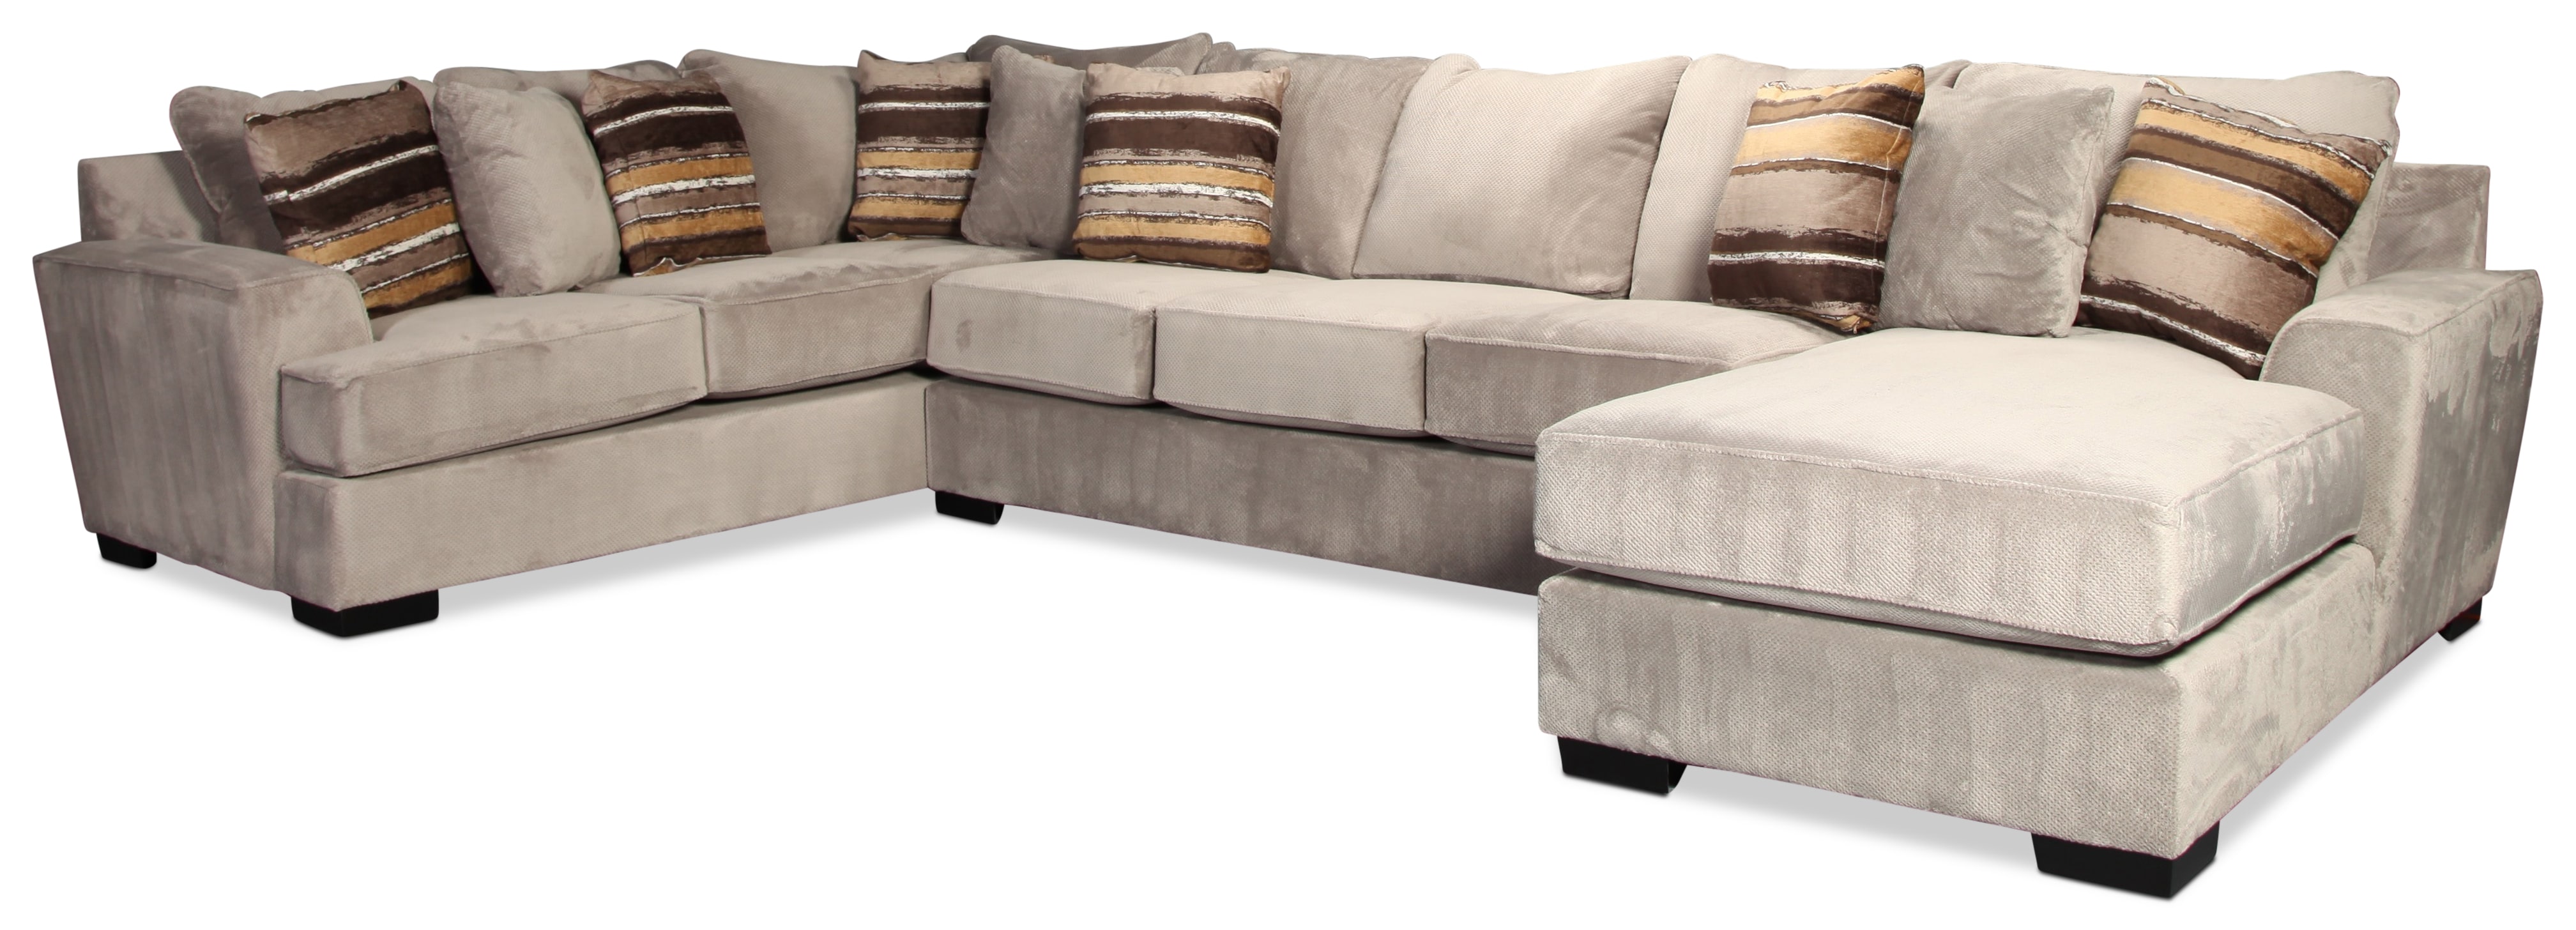 Serendipity 3-Piece Sectional